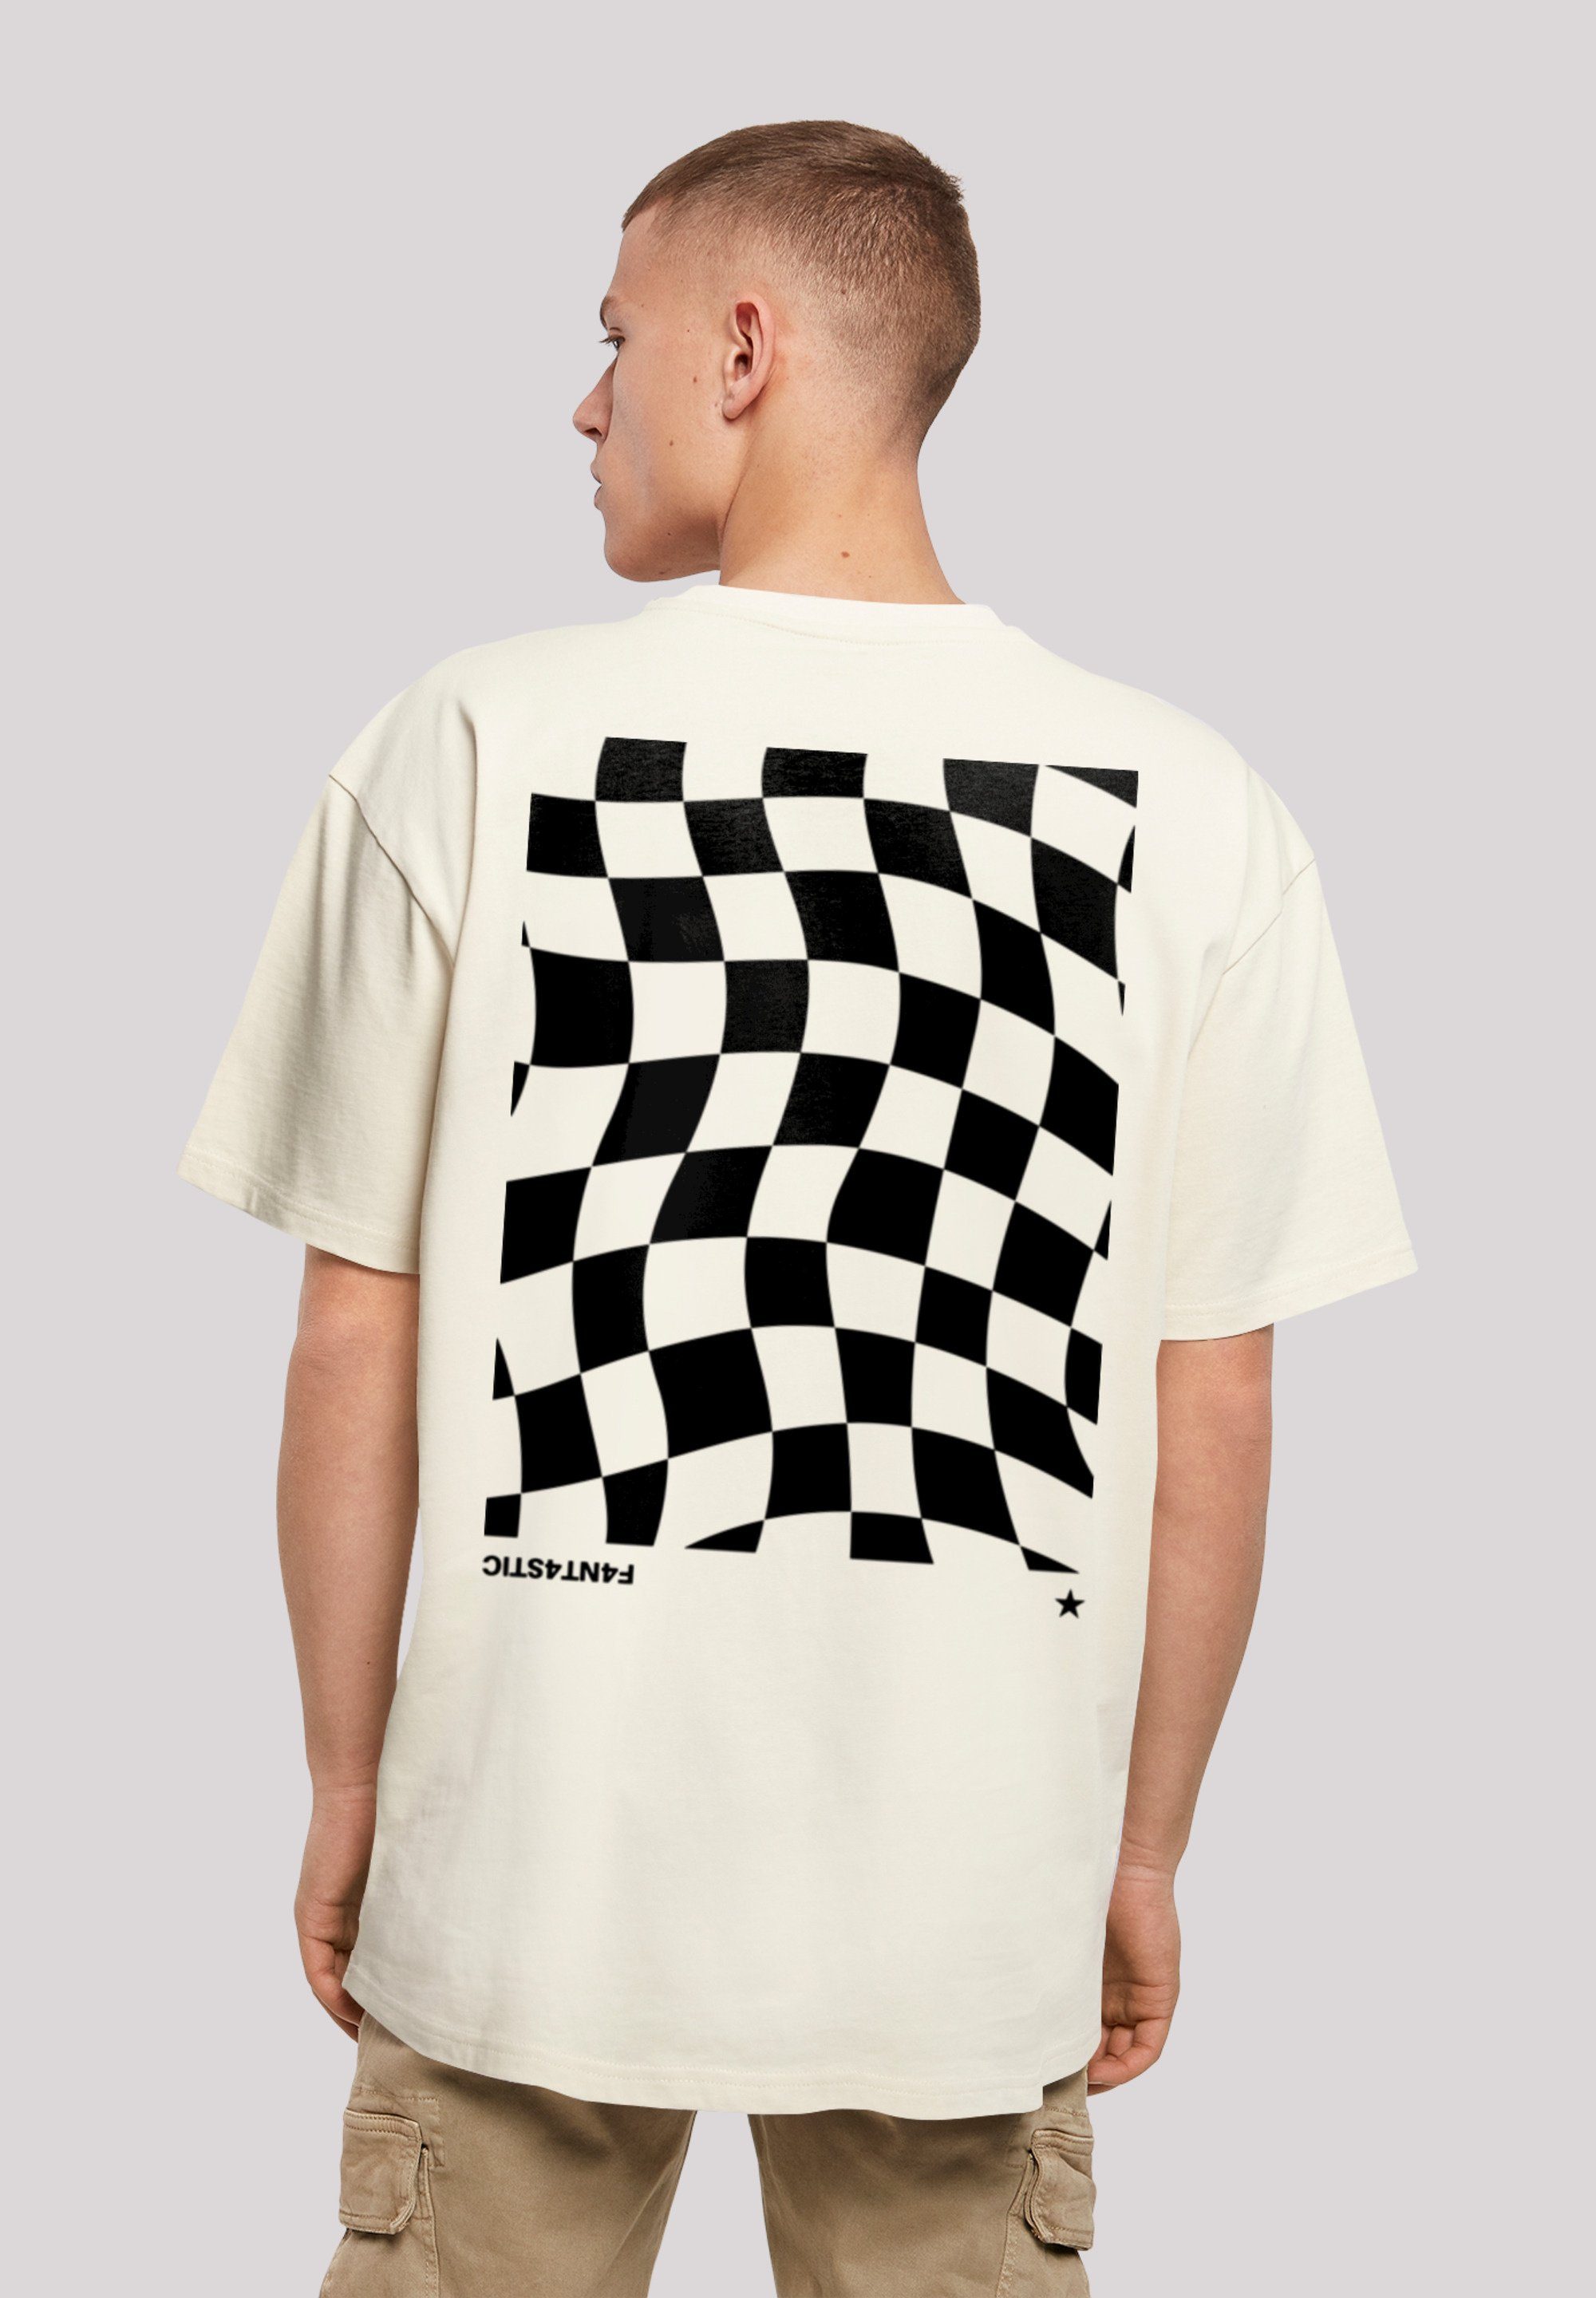 F4NT4STIC T-Shirt Wavy Schach Muster Print sand